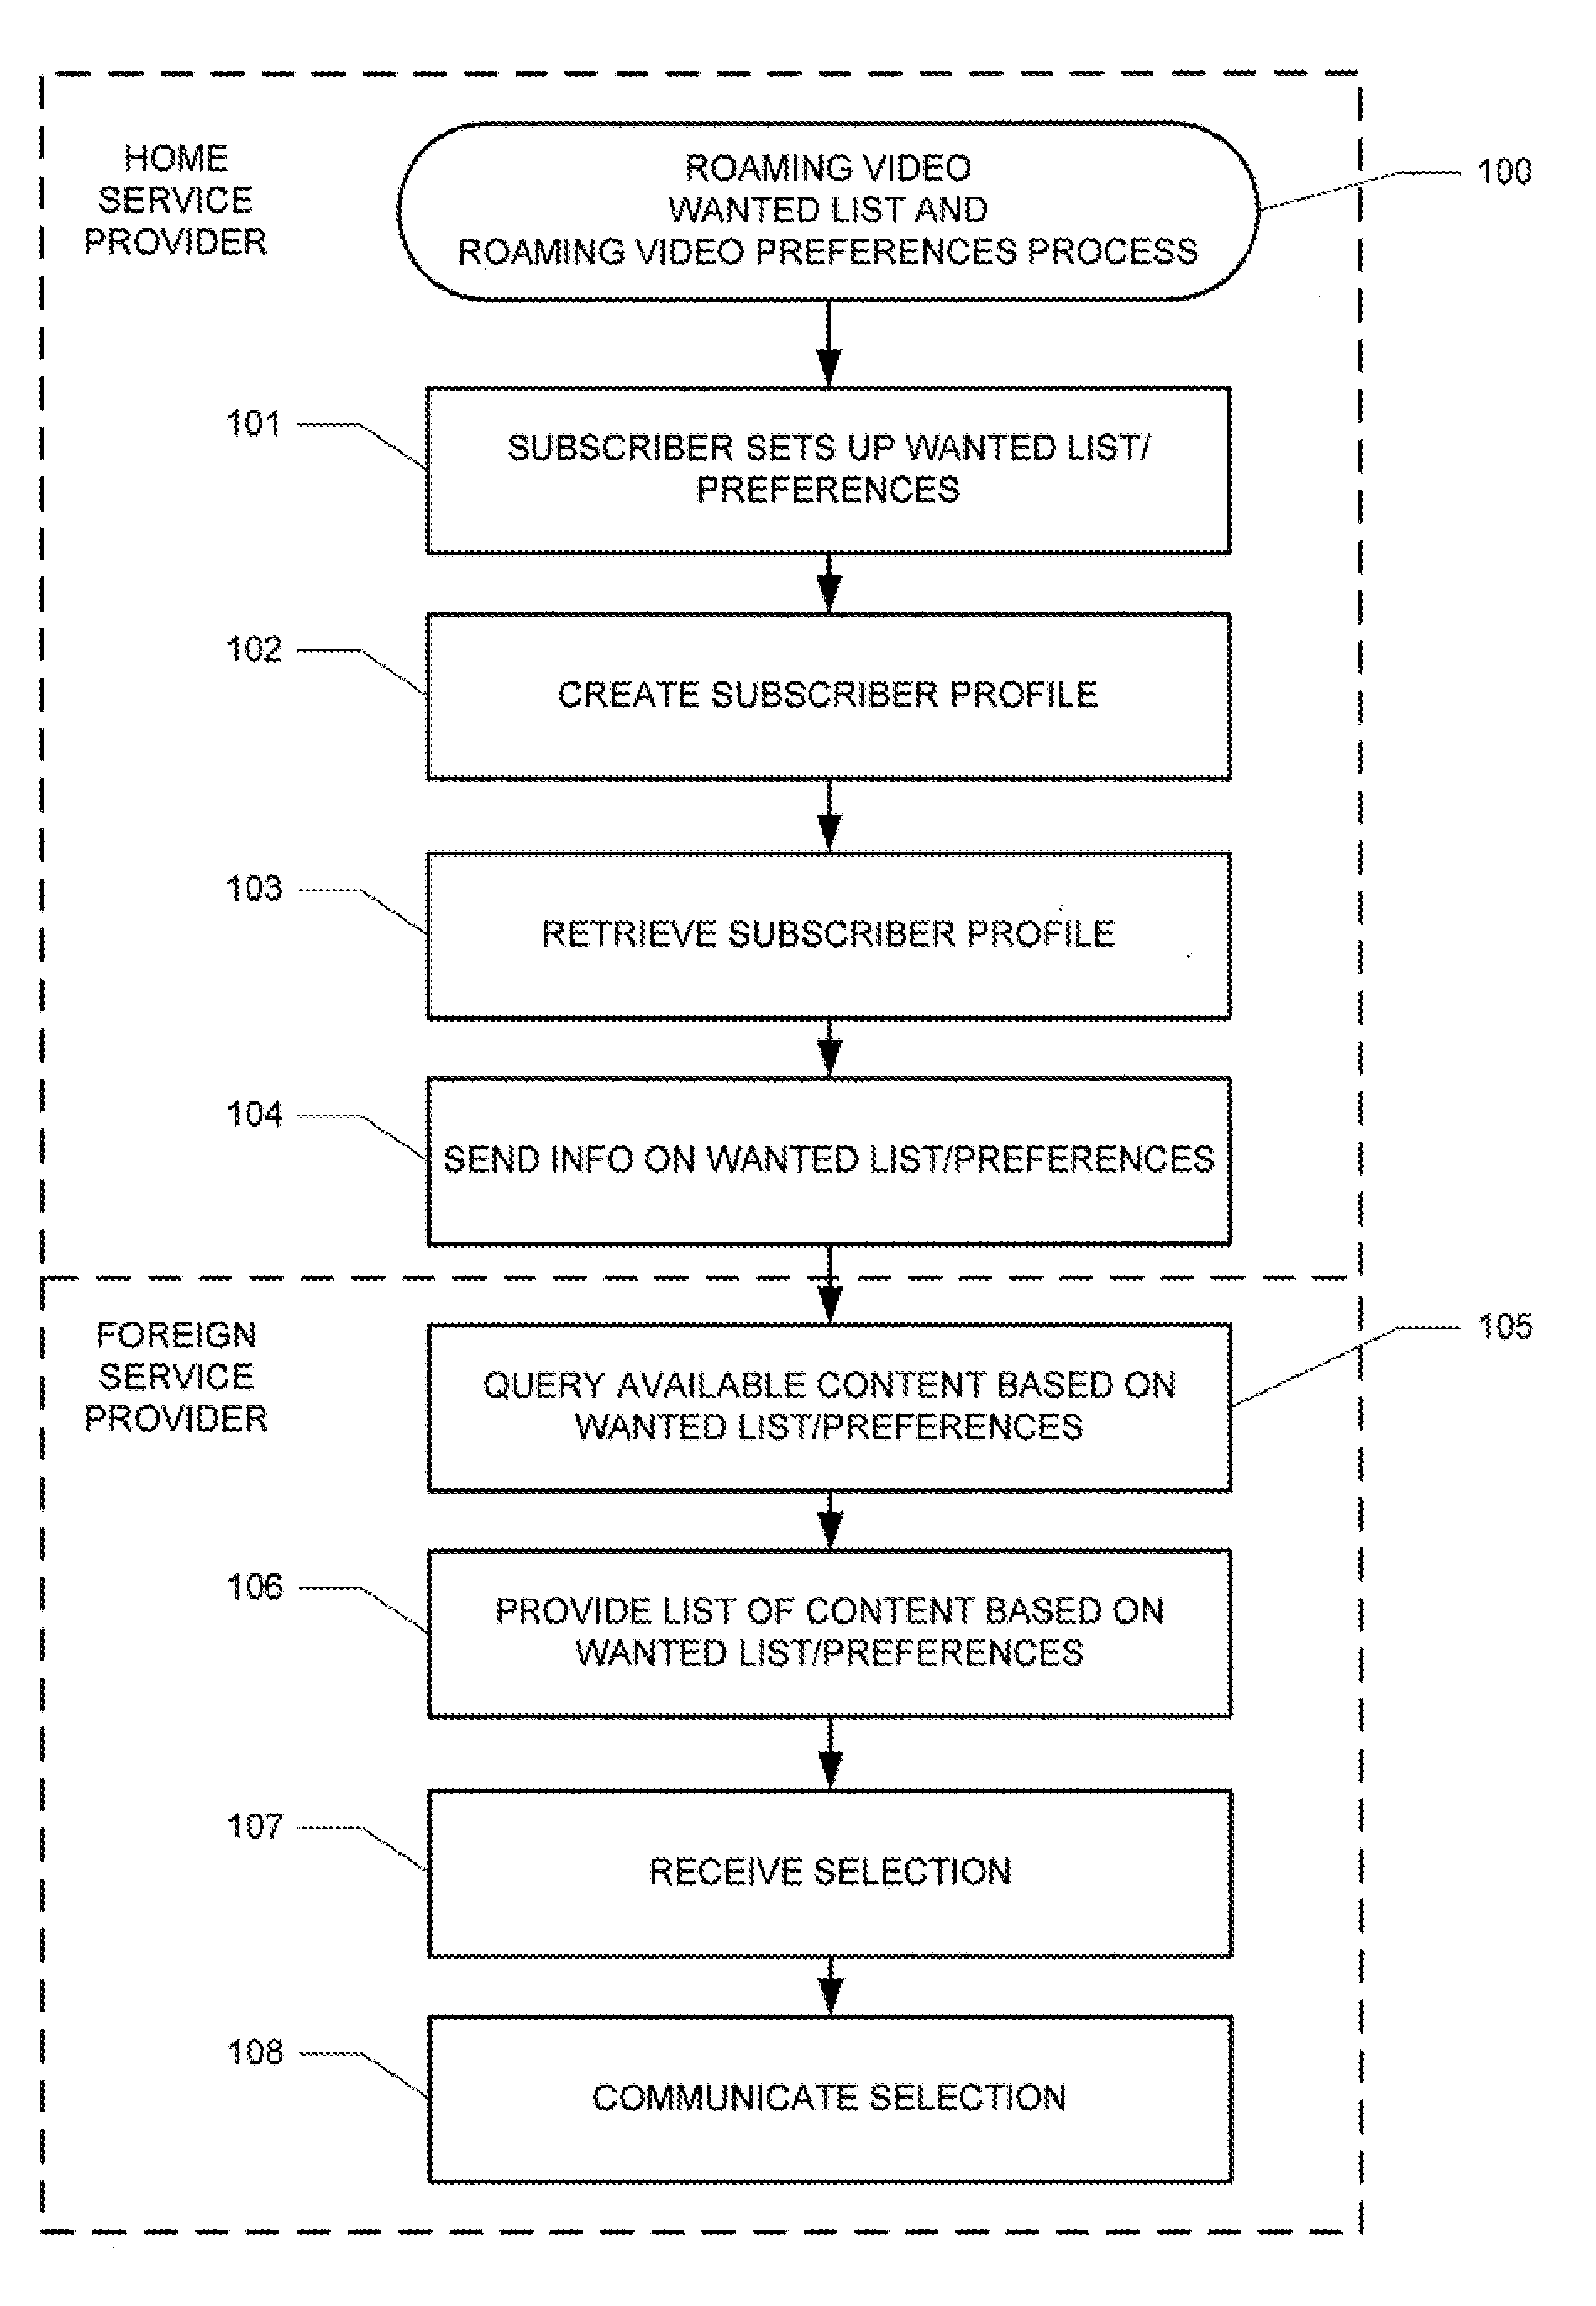 Systems and methods for providing roaming video wanted list and roaming video preferences